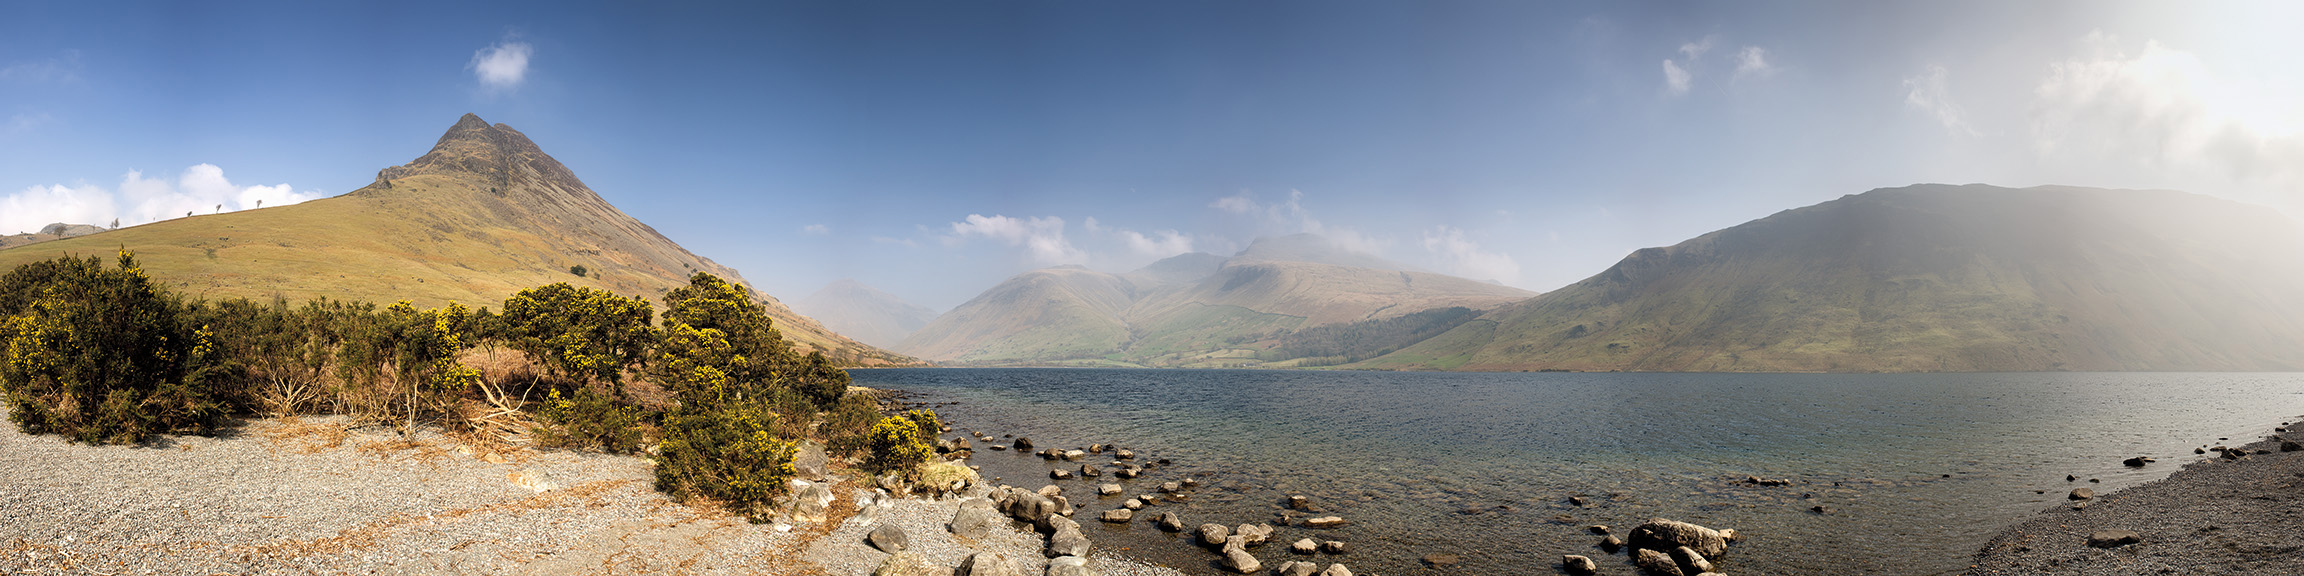 Wastwater and Scafell Pike